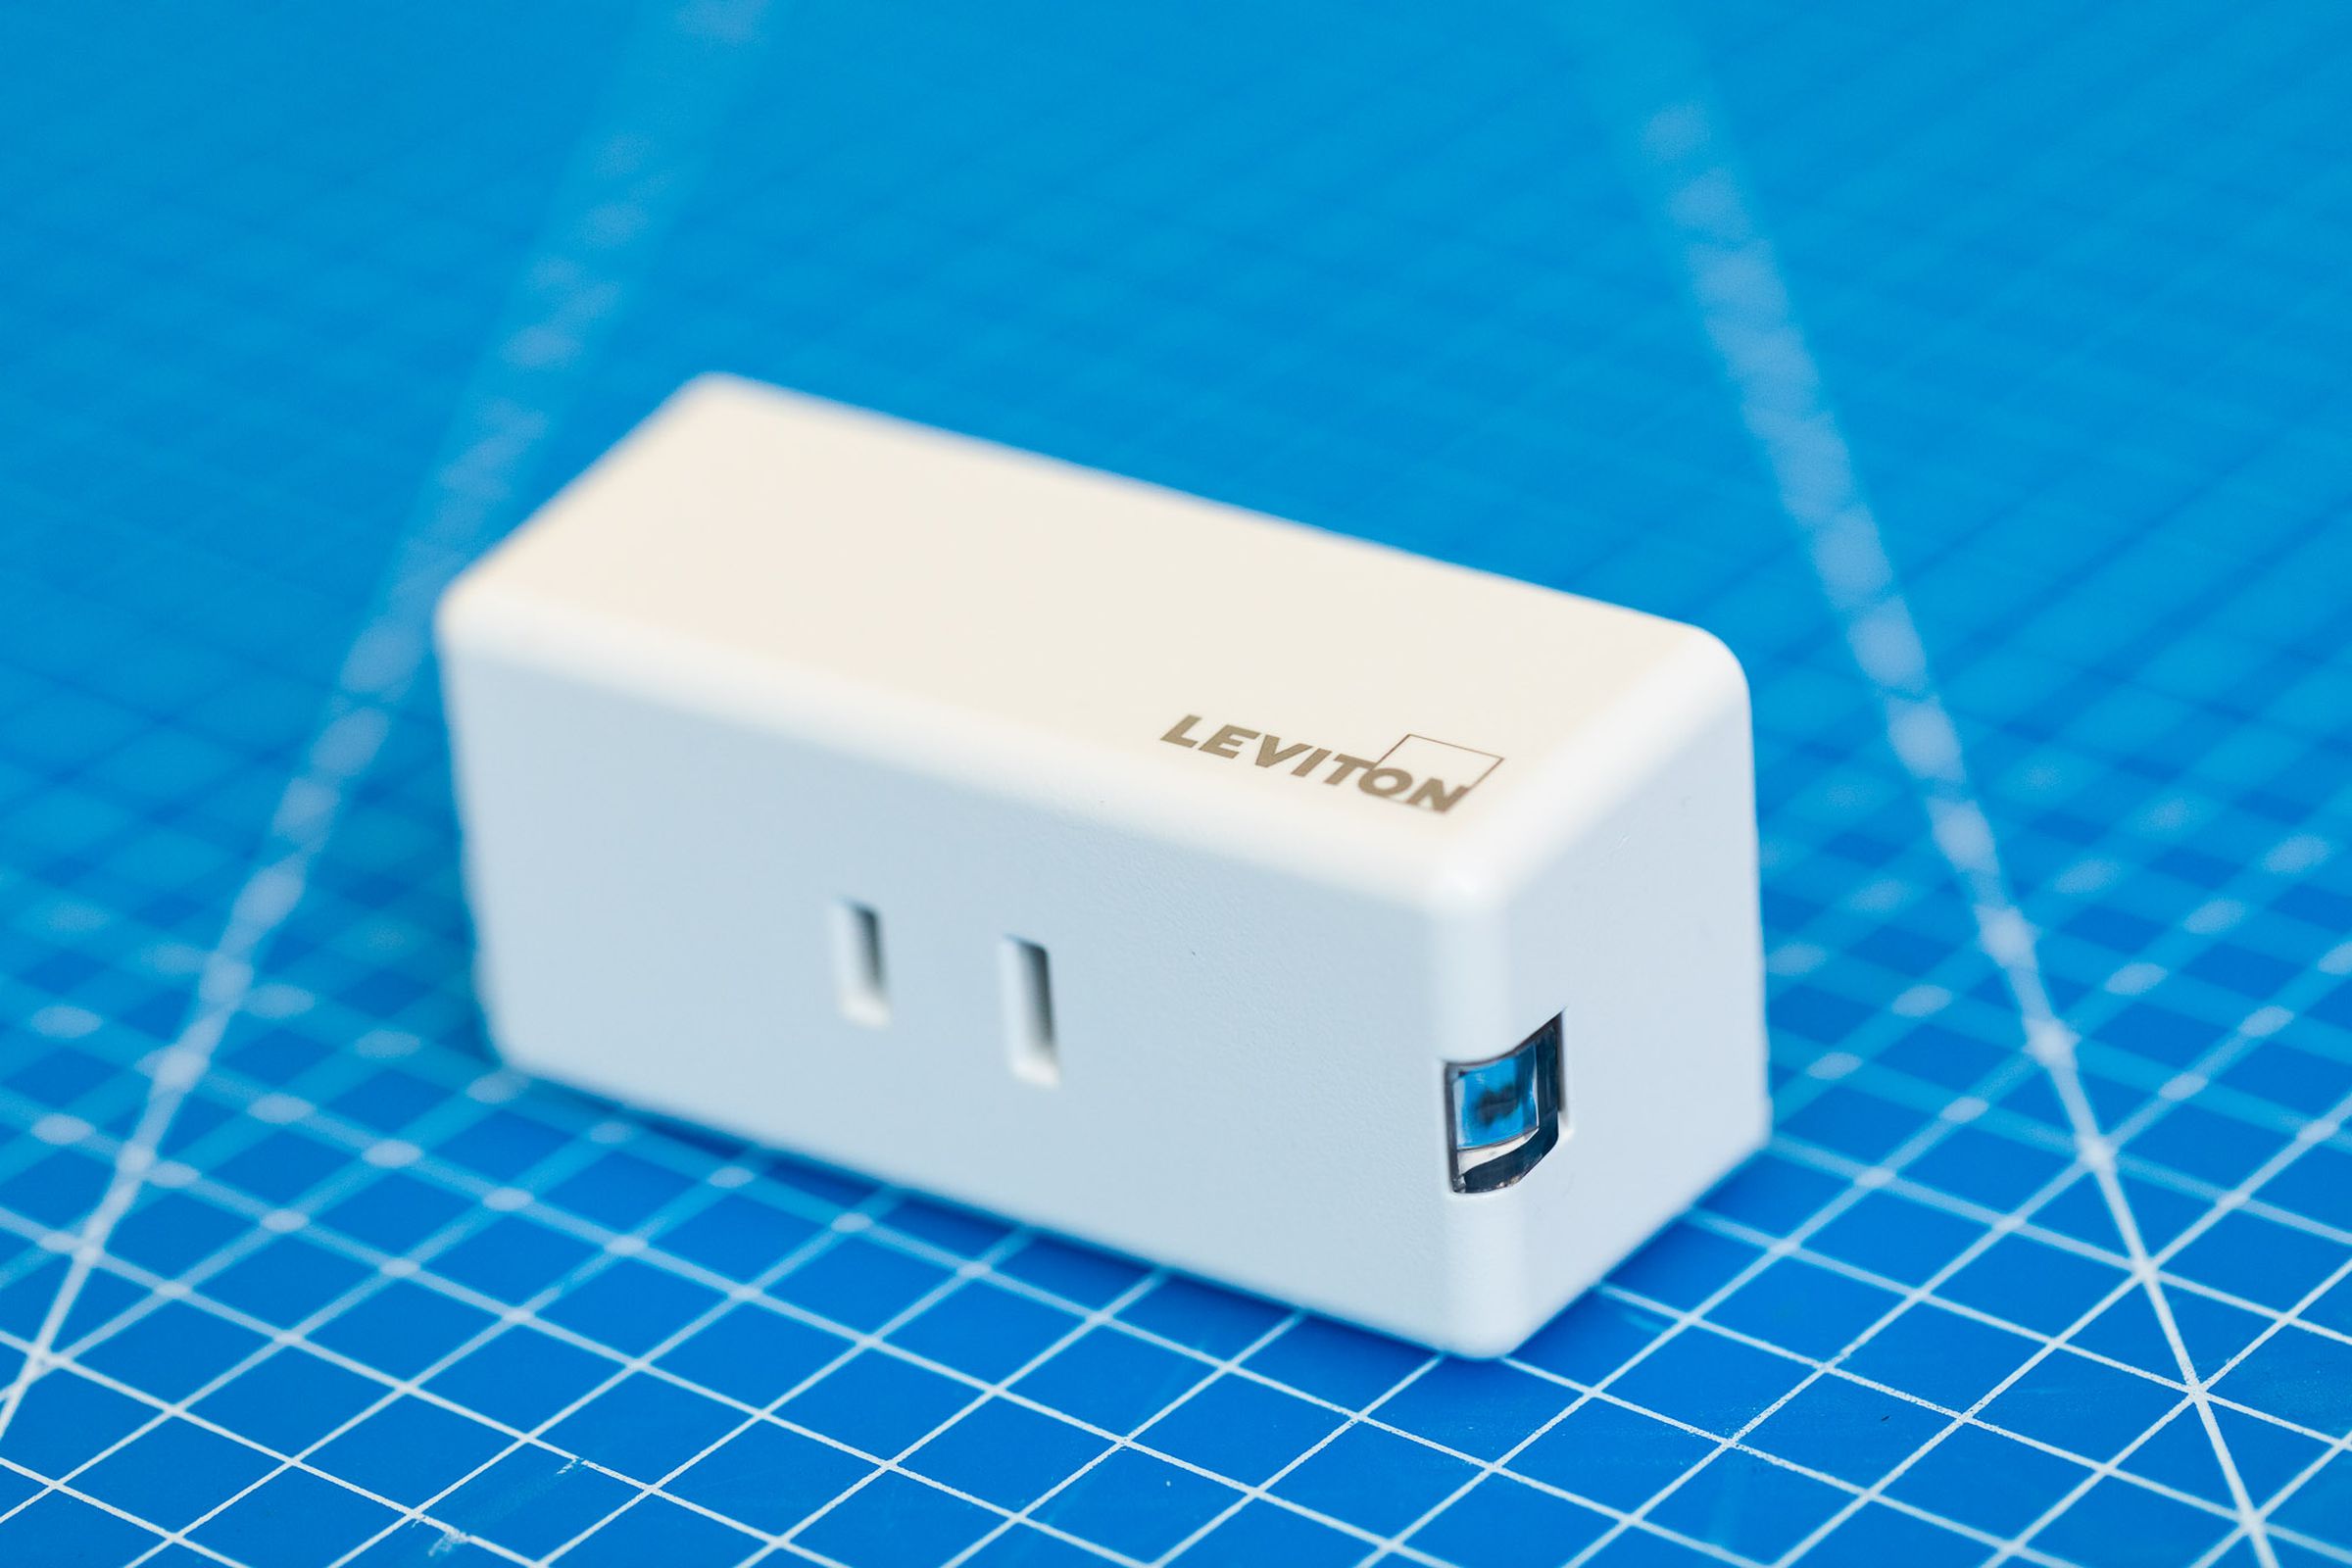 The Leviton smart dimmer, a white rectangular prism with a two-prong US-style AC outlet on the front.